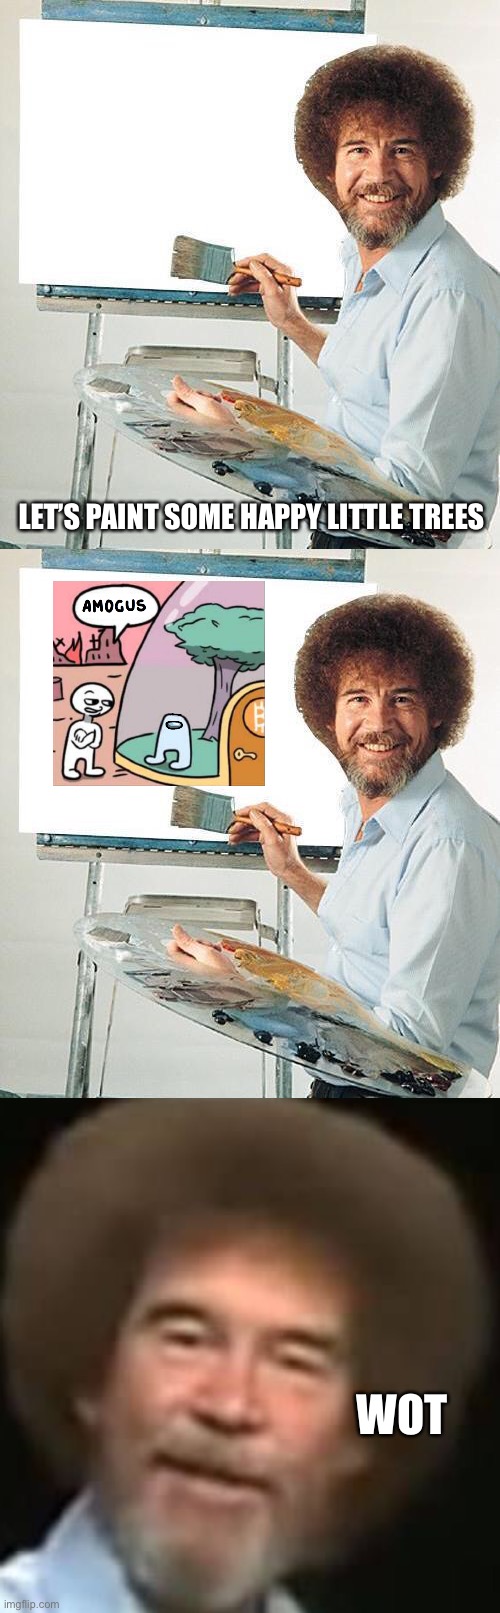 Unhappy little trees | LET’S PAINT SOME HAPPY LITTLE TREES; WOT | image tagged in bob ross troll,bob ross | made w/ Imgflip meme maker